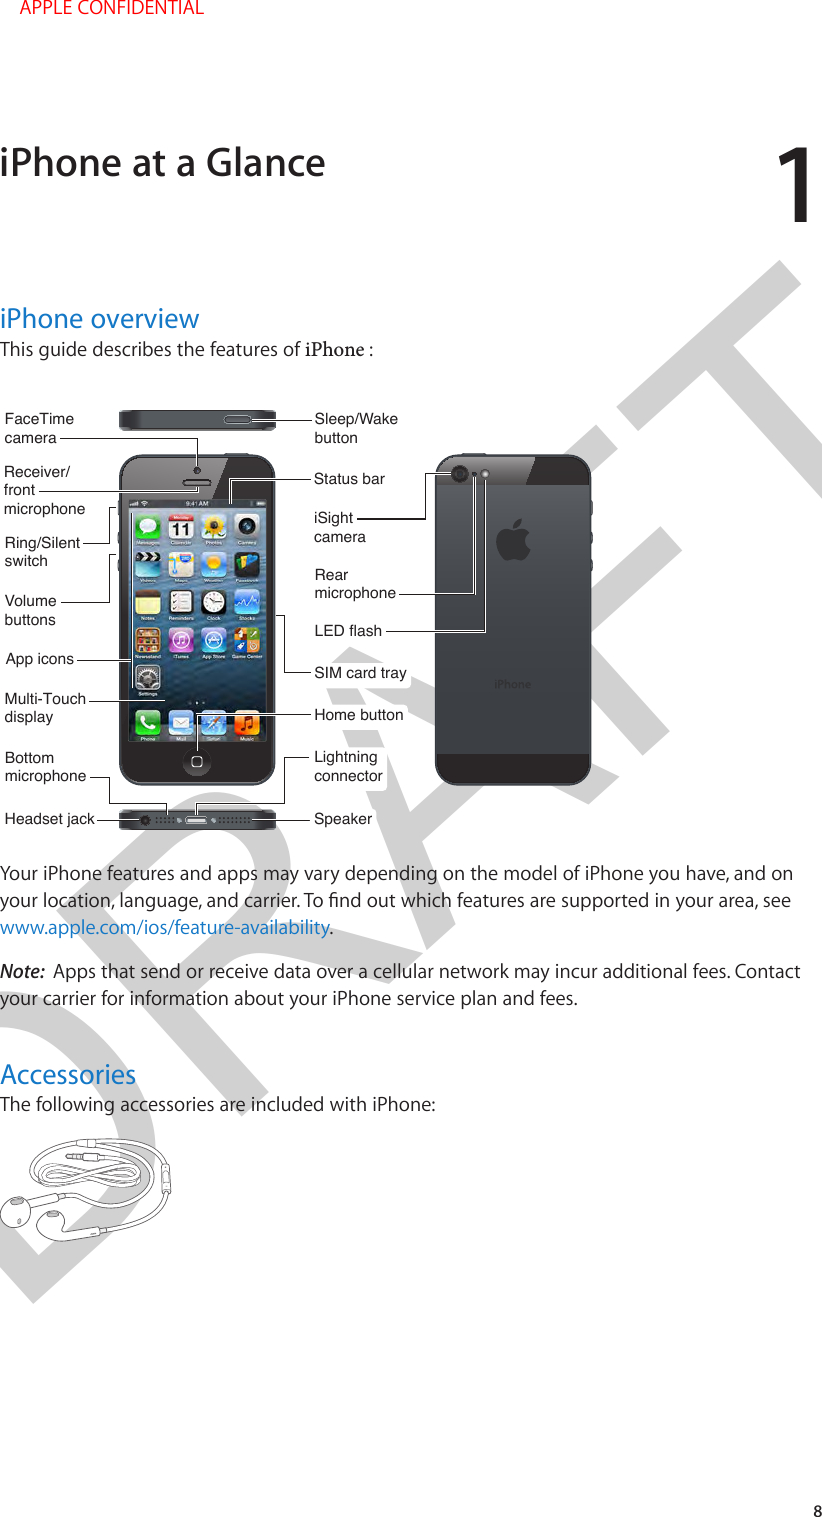 DRAFT18iPhone overviewThis guide describes the features of iPhone :SIMcardtraySIMcardtrayReceiver/frontmicrophoneReceiver/frontmicrophoneHeadsetjackHeadsetjackRing/SilentswitchRing/SilentswitchFaceTimecameraFaceTimecameraVolumebuttonsVolumebuttonsMulti-TouchdisplayMulti-TouchdisplayHomebuttonHomebuttonBottommicrophoneBottommicrophoneSleep/WakebuttonSleep/WakebuttoniSightcameraiSightcameraLED flashLED flashRearmicrophoneRearmicrophoneApp iconsApp iconsStatusbarStatusbarSpeakerSpeakerLightningconnectorLightningconnectorYour iPhone features and apps may vary depending on the model of iPhone you have, and on www.apple.com/ios/feature-availability.Note:  Apps that send or receive data over a cellular network may incur additional fees. Contact your carrier for information about your iPhone service plan and fees.AccessoriesThe following accessories are included with iPhone:iPhone at a Glance APPLE CONFIDENTIAL